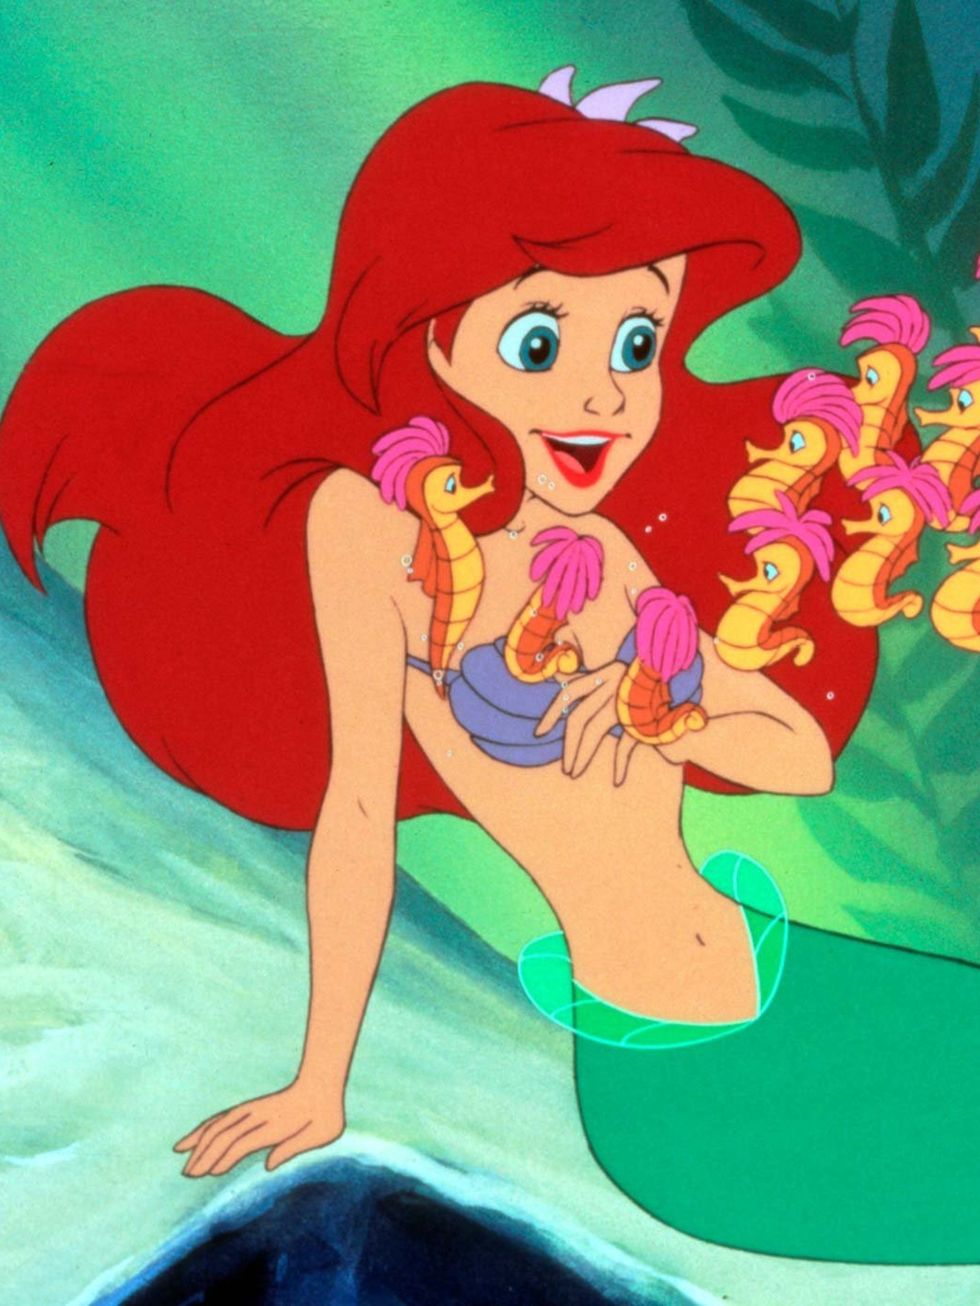 <p><strong>Ariel, The Little Mermaid</strong></p><p>Oh to look as beautiful as Ariel under the sea! The shell bikini, the hair  that tail! Sadly, for us non-amphibious creatures, our underwater adventures typically involve an unflattering wetsuit and bed